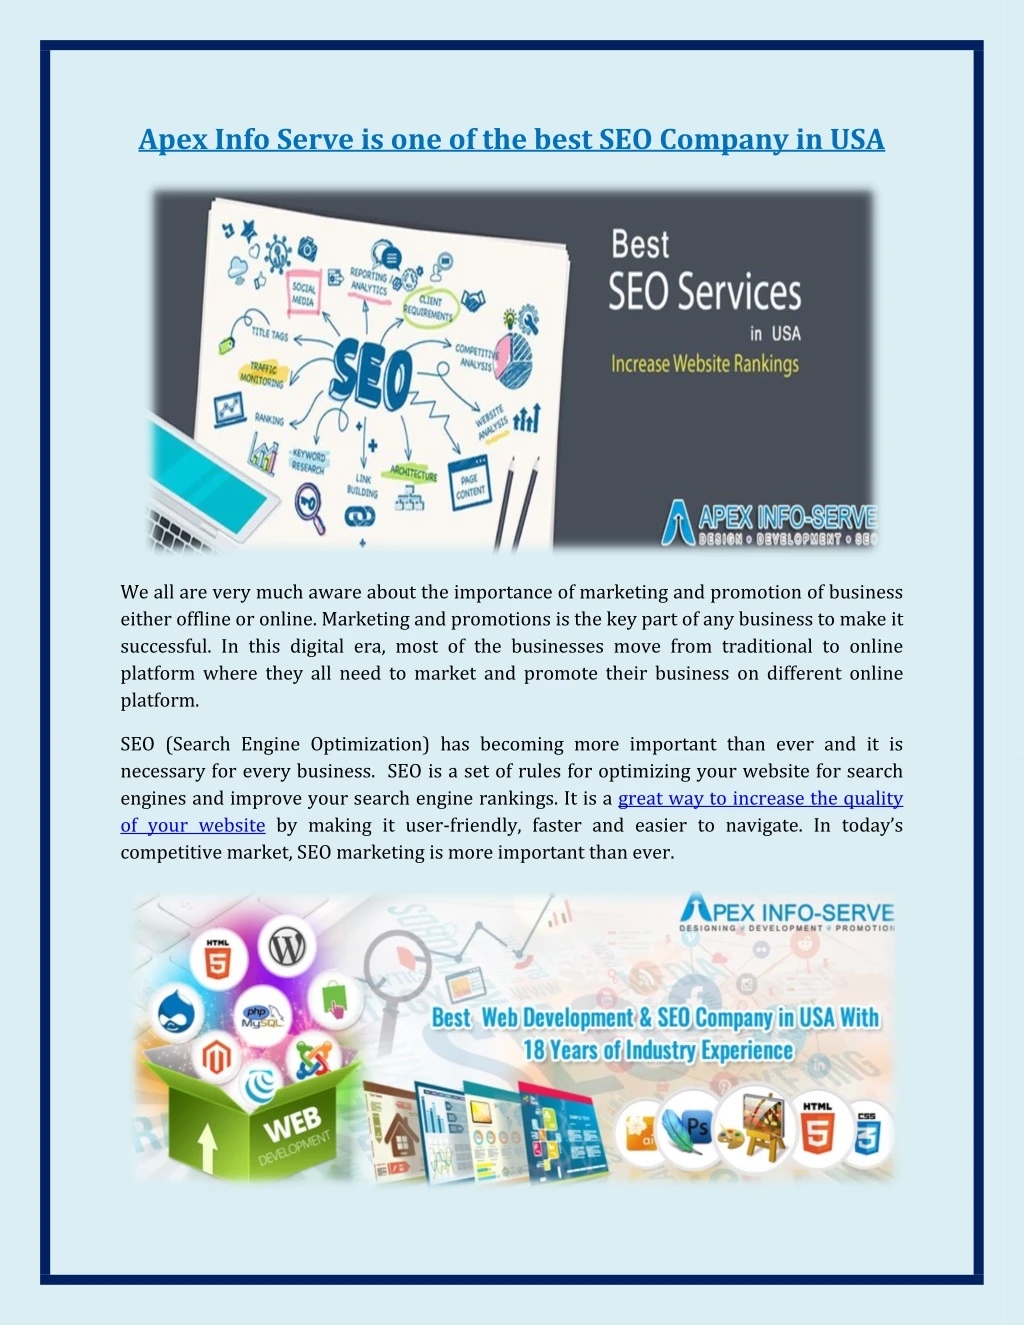 apex info serve is one of the best seo company